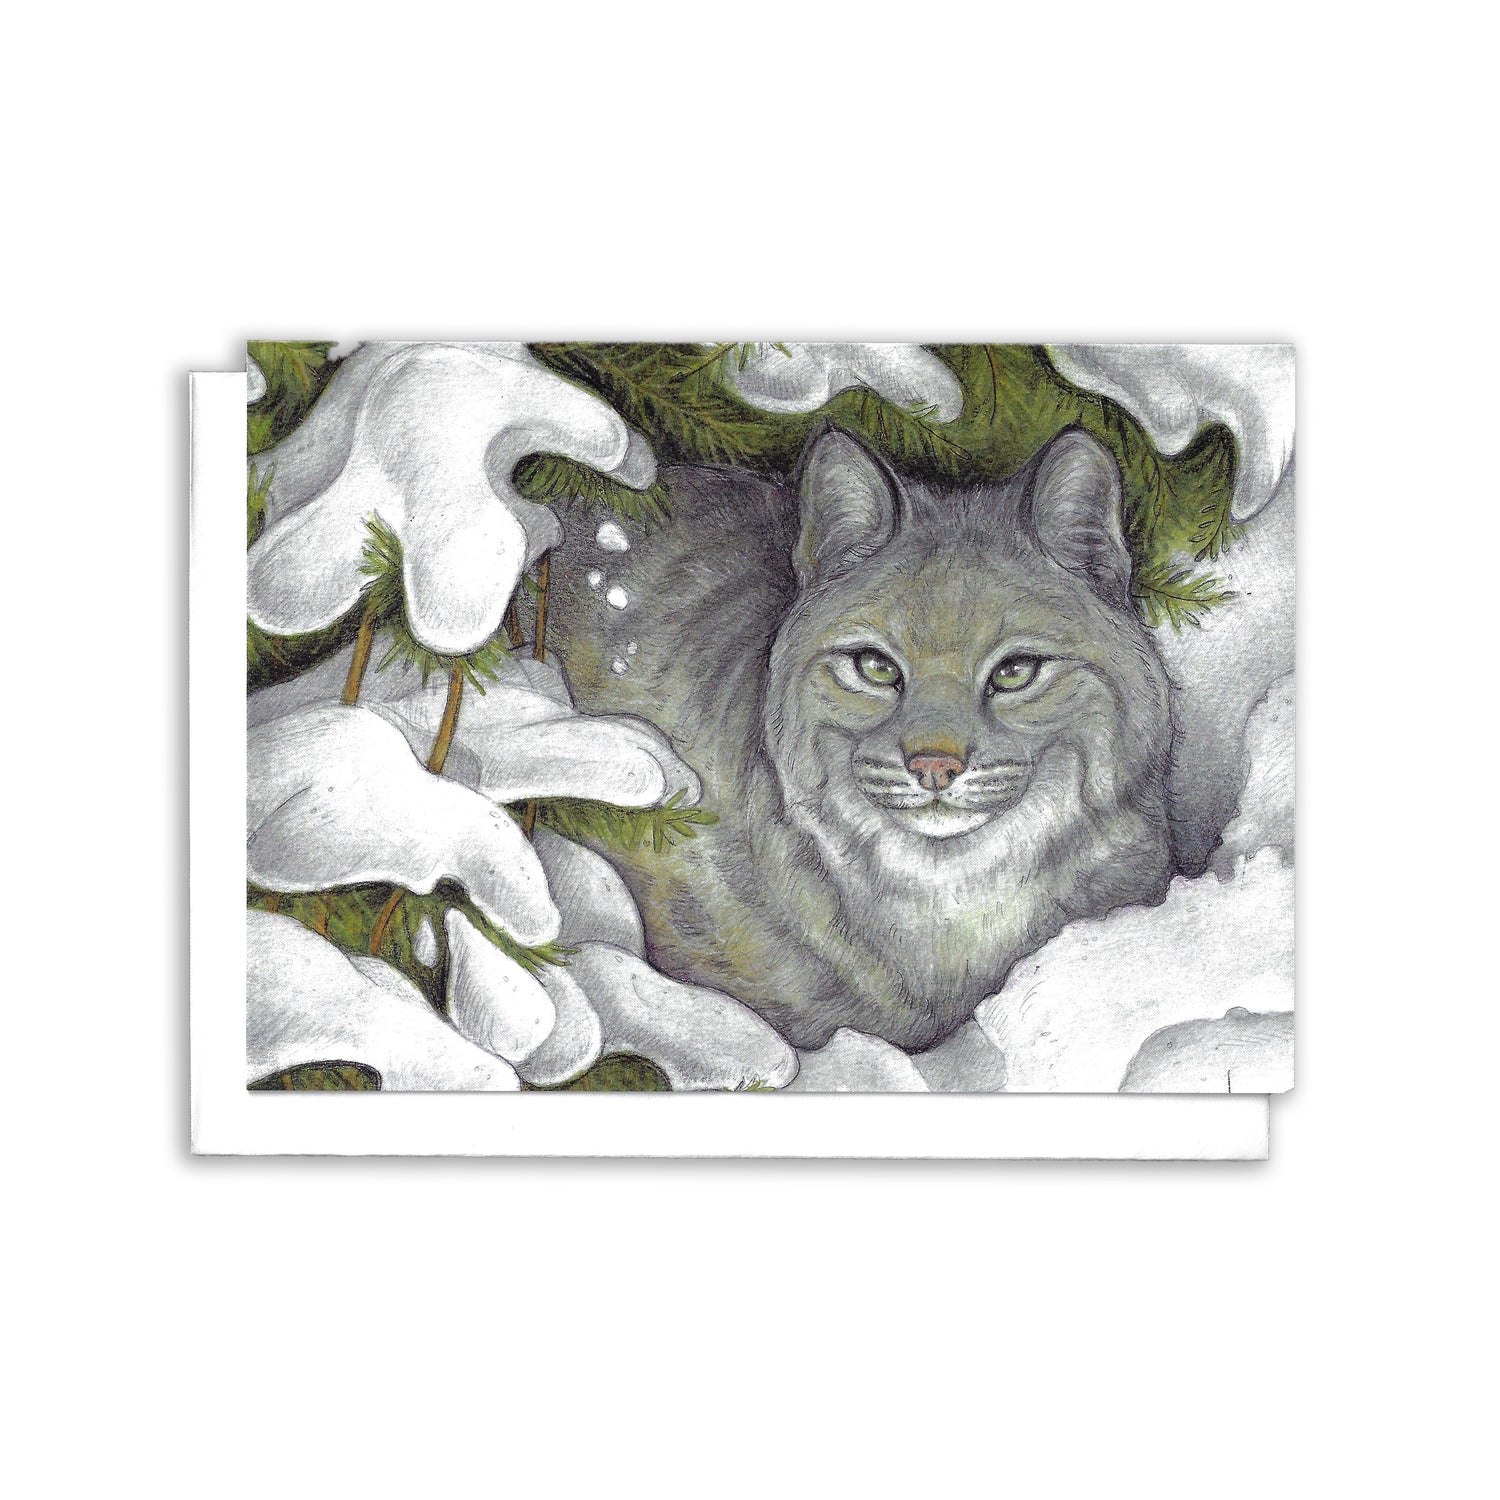 Illustrated Greeting Card of bobcat sitting under snow-covered pine branches